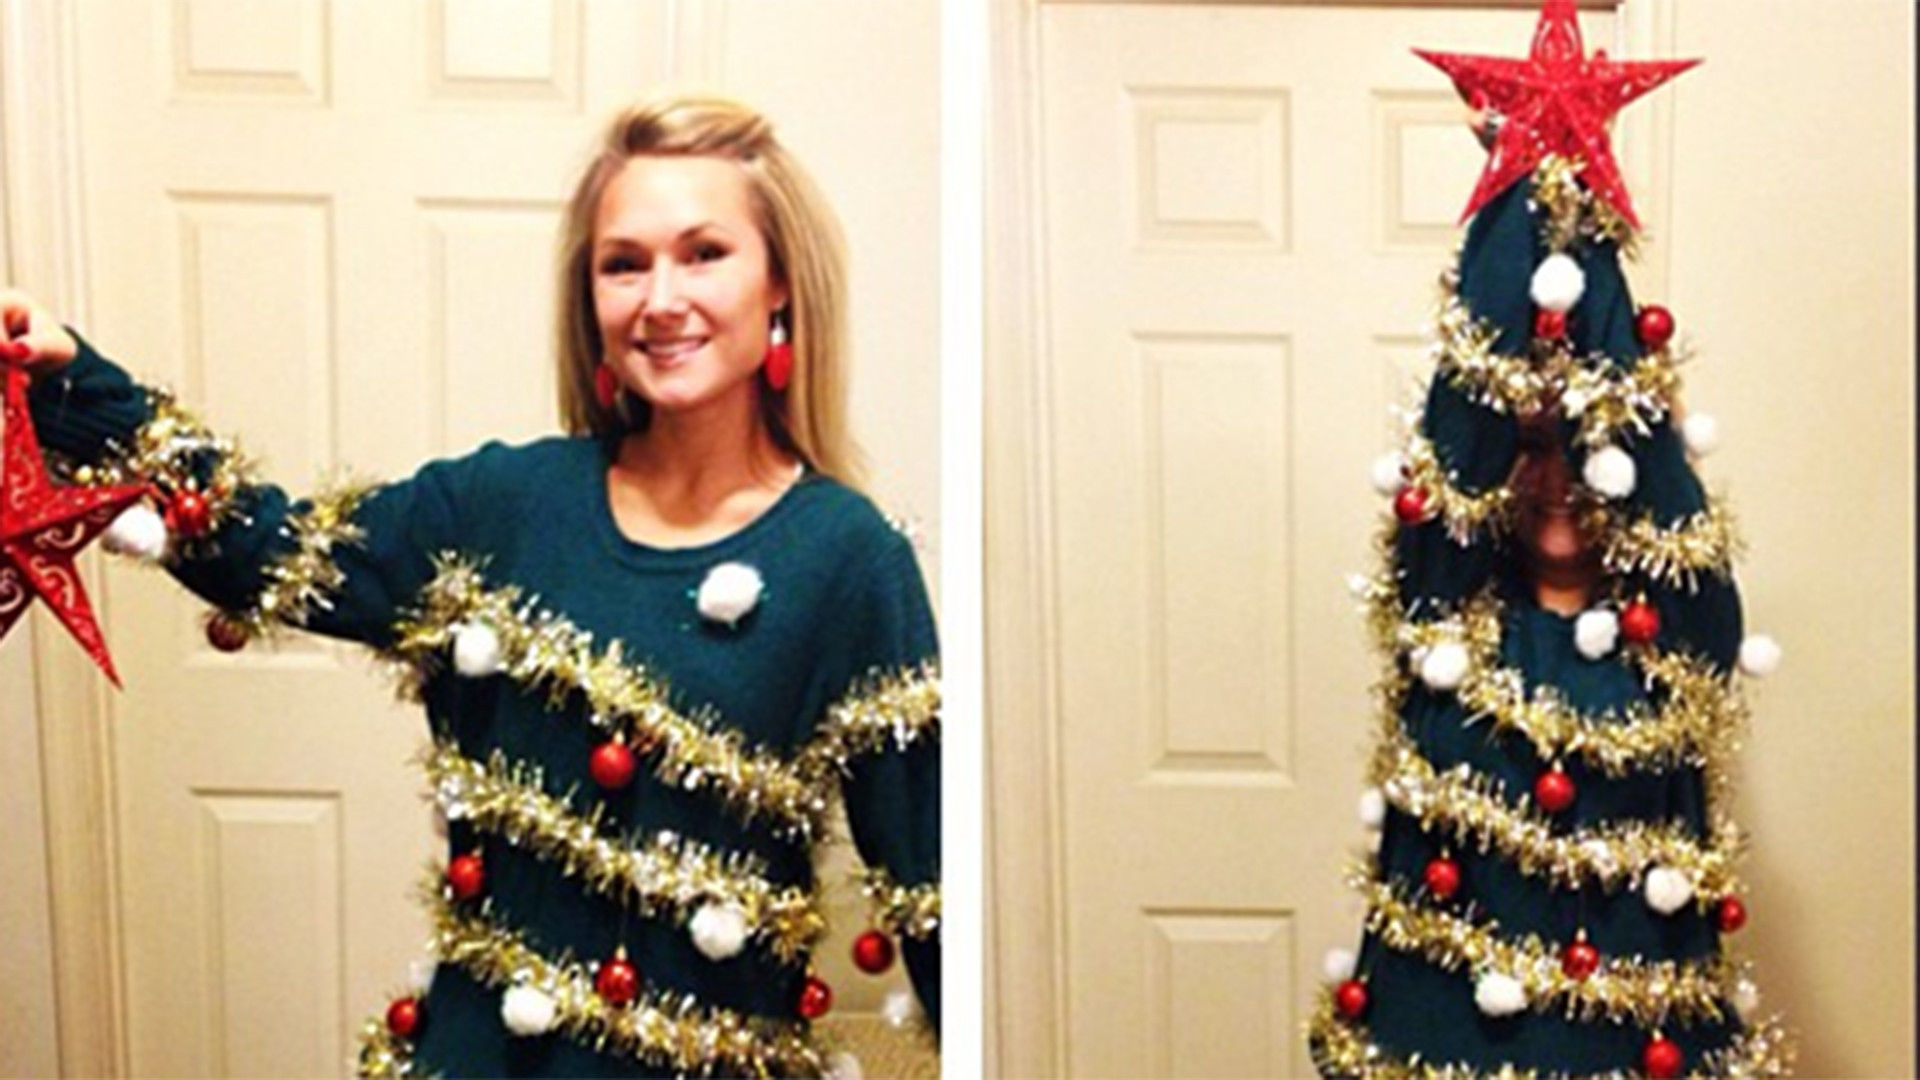 DIY Ugly Christmas Sweater
 7 DIY ugly Christmas sweaters from Pinterest TODAY